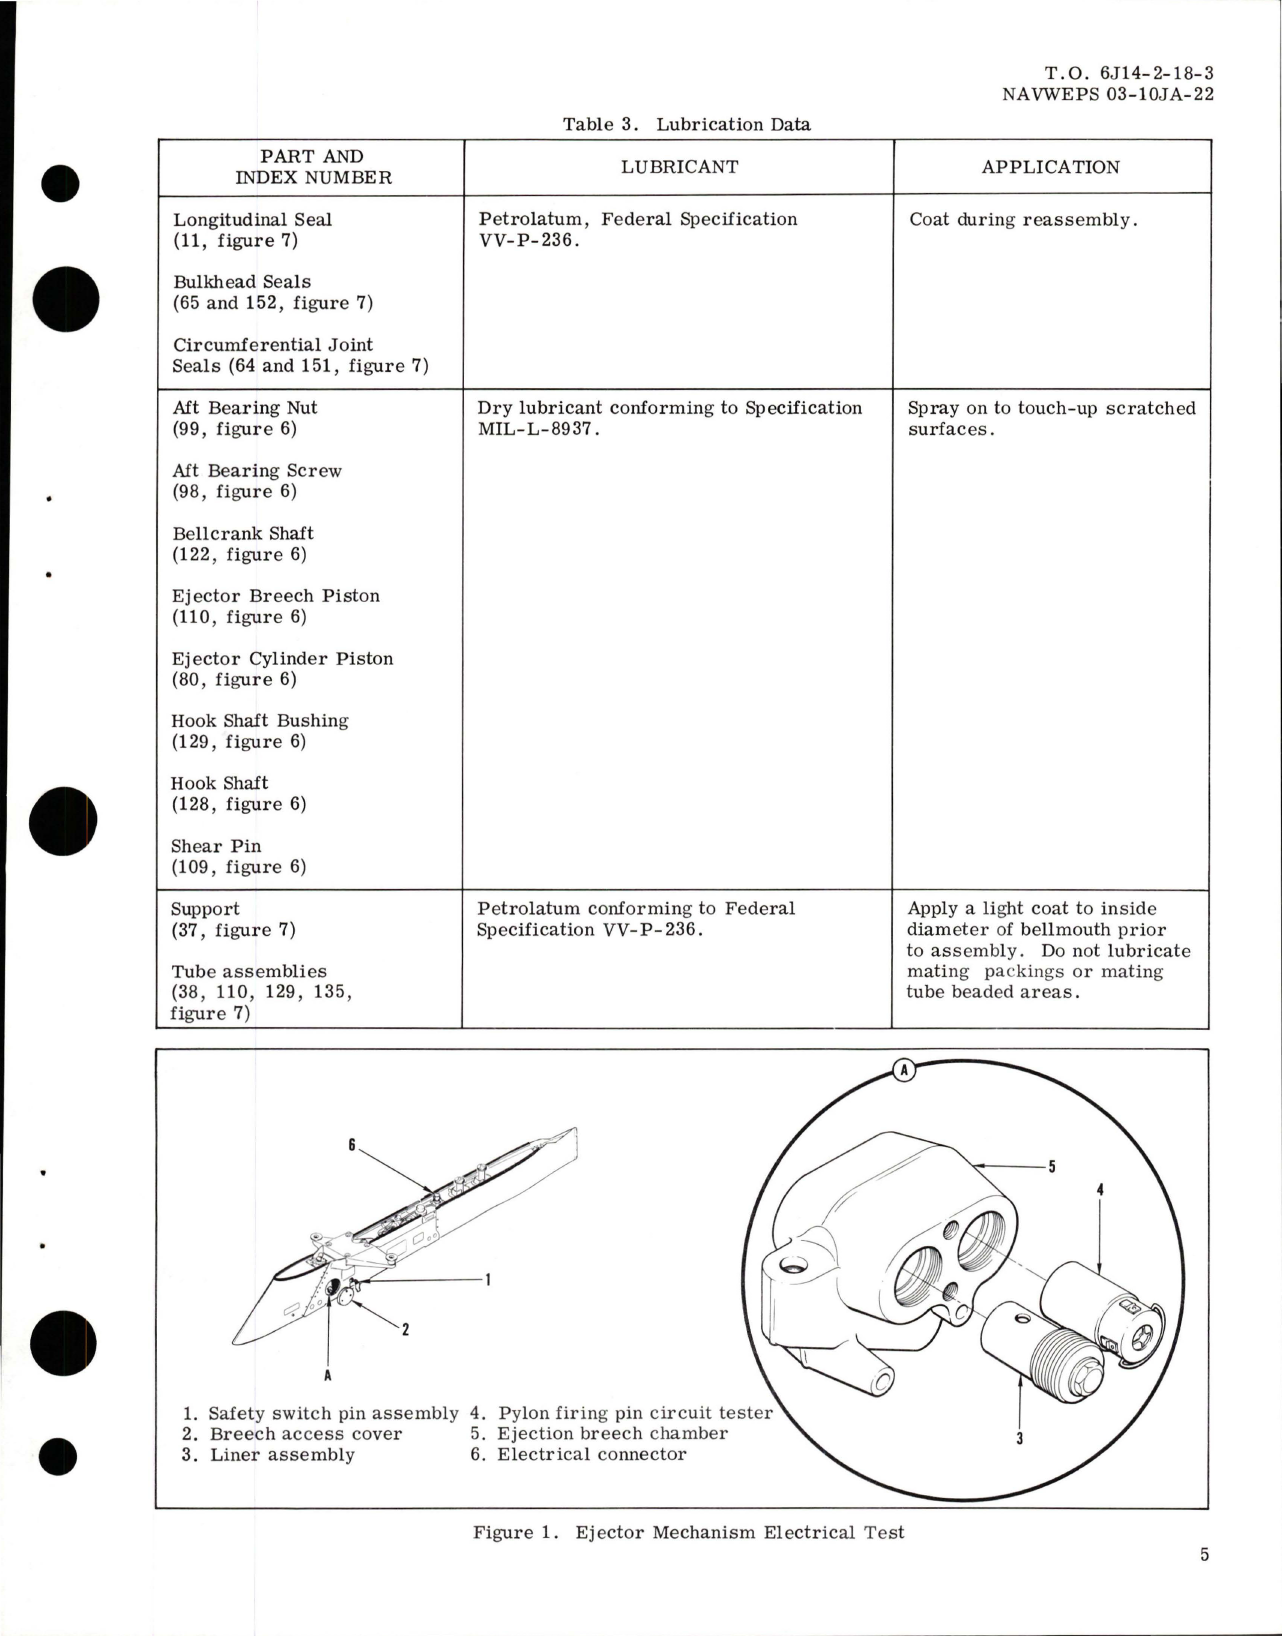 Sample page 7 from AirCorps Library document: Overhaul with Parts Breakdown for Tank and Ejector Pylon Assembly - 370 Gallon - Parts 26-370-4843 and 26-370-4845